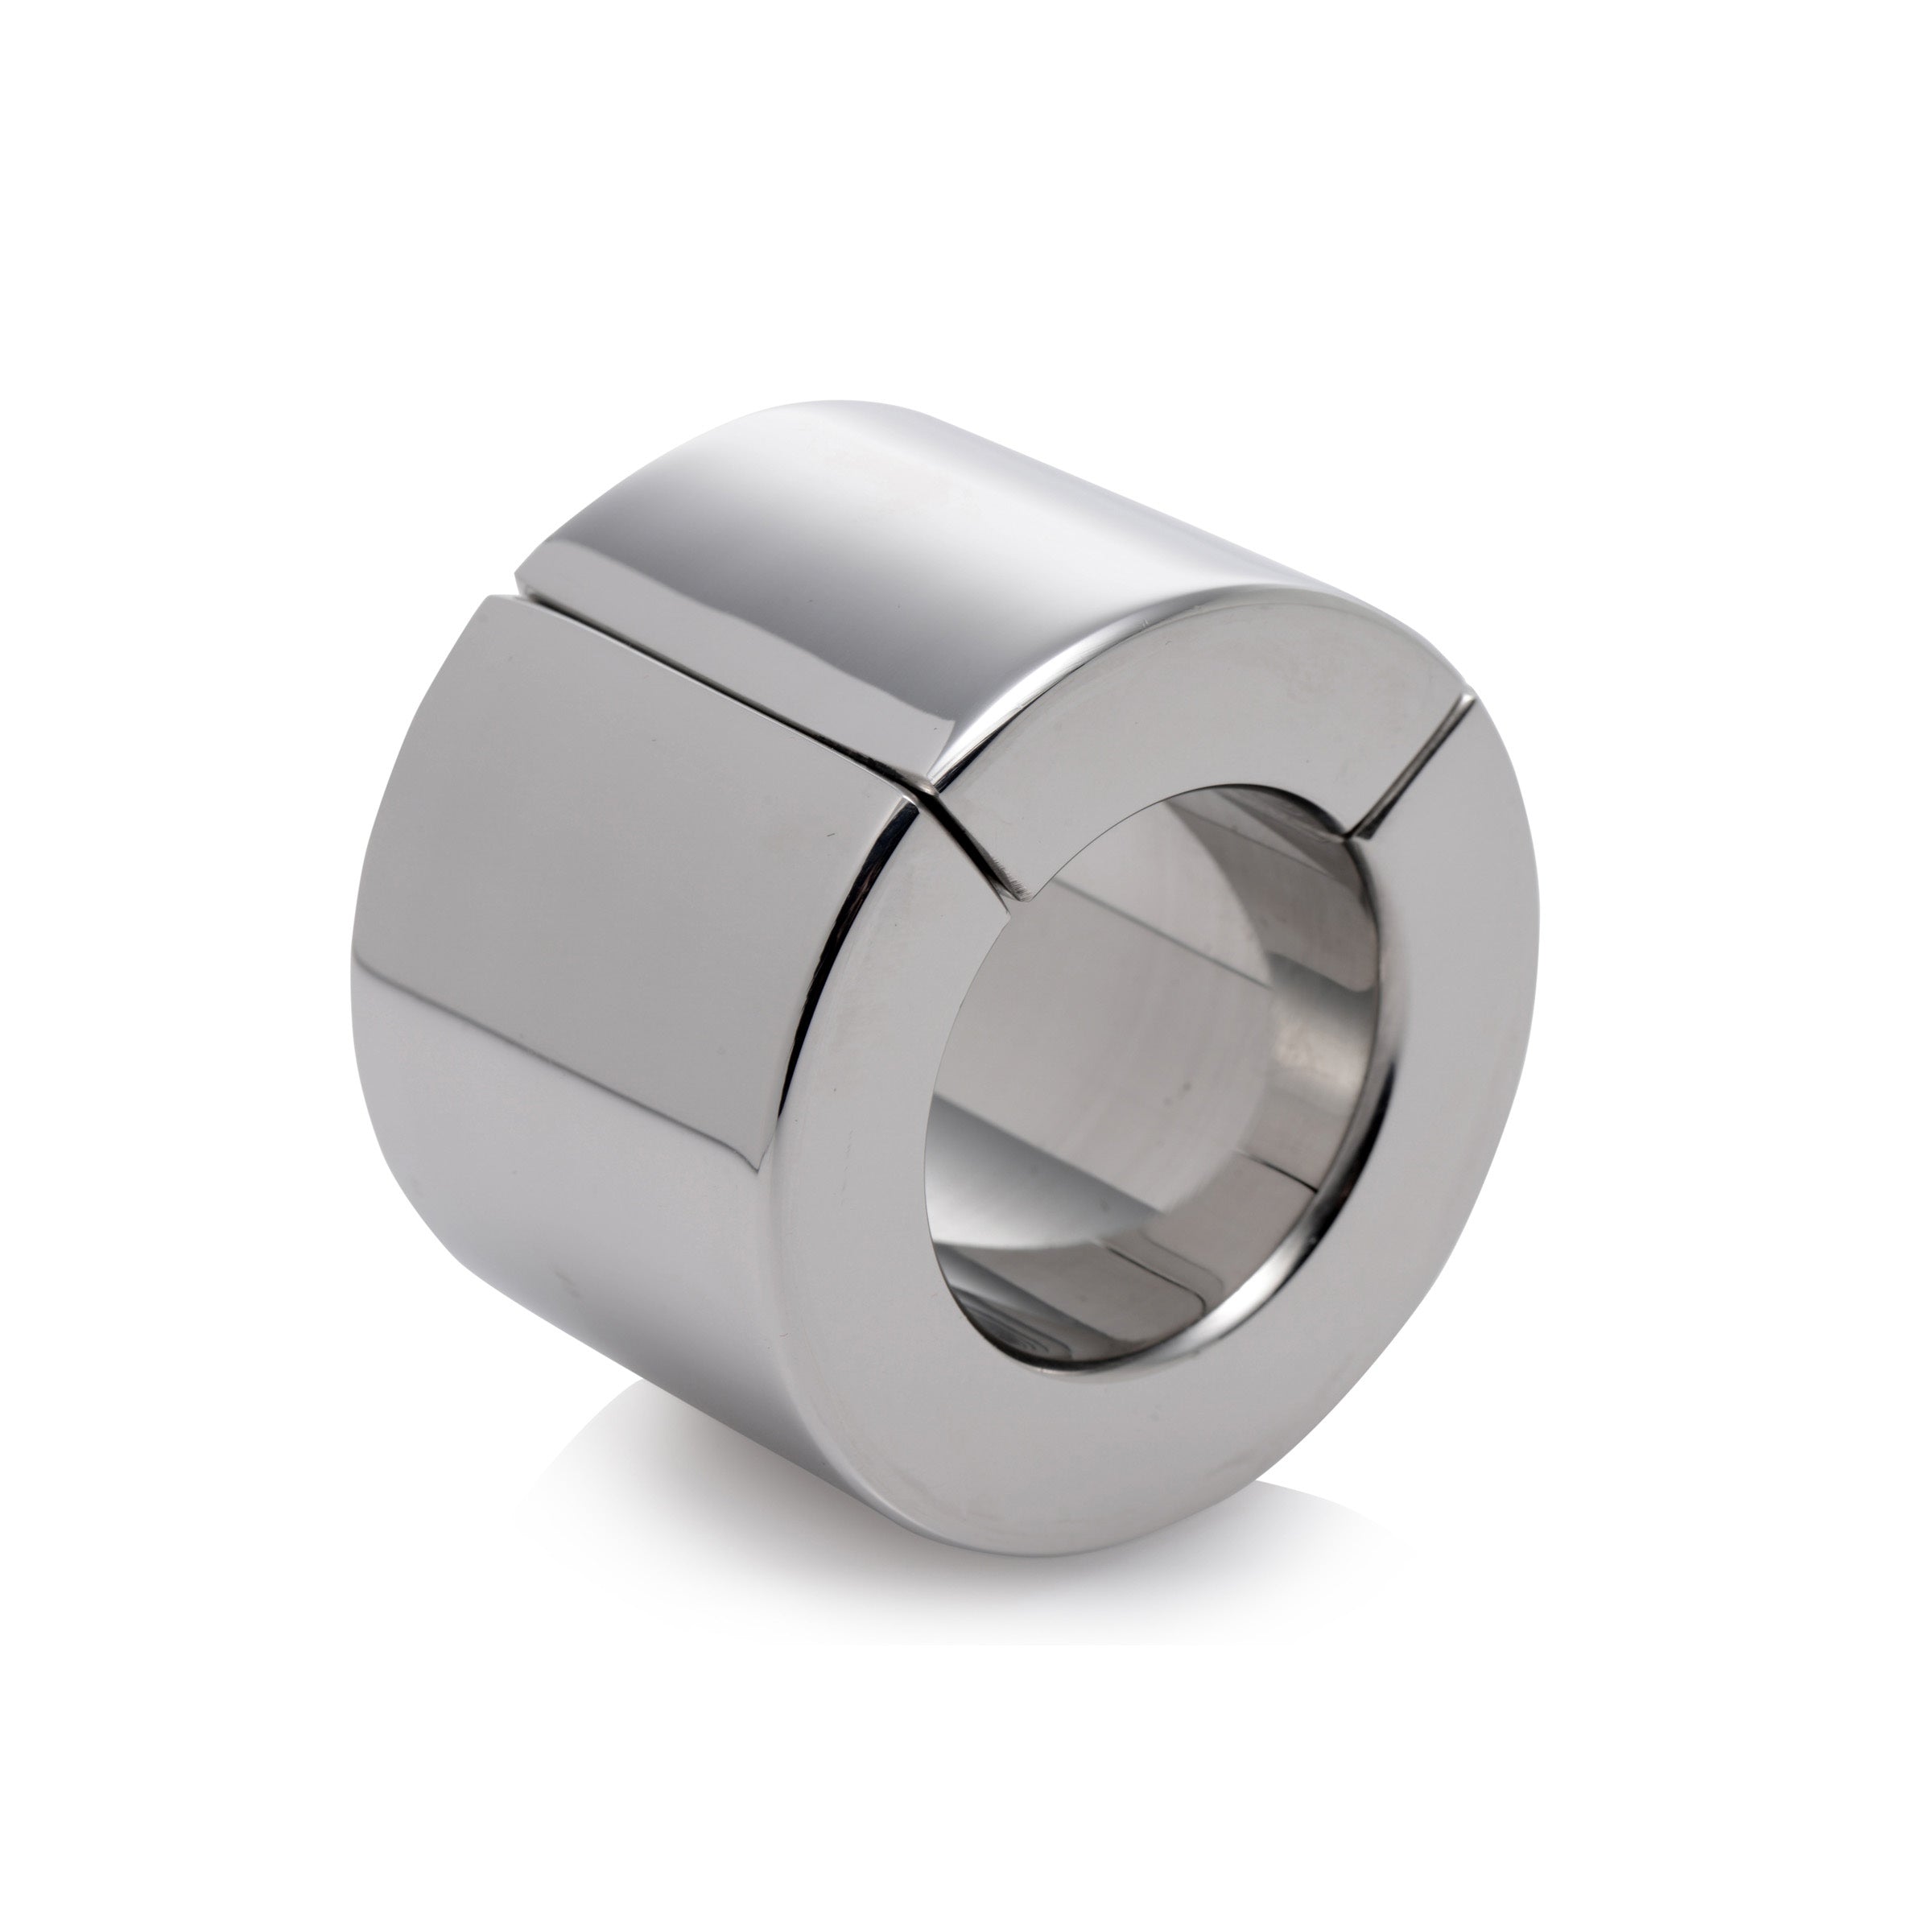 Magnetic Stainless Steel Ball Stretcher